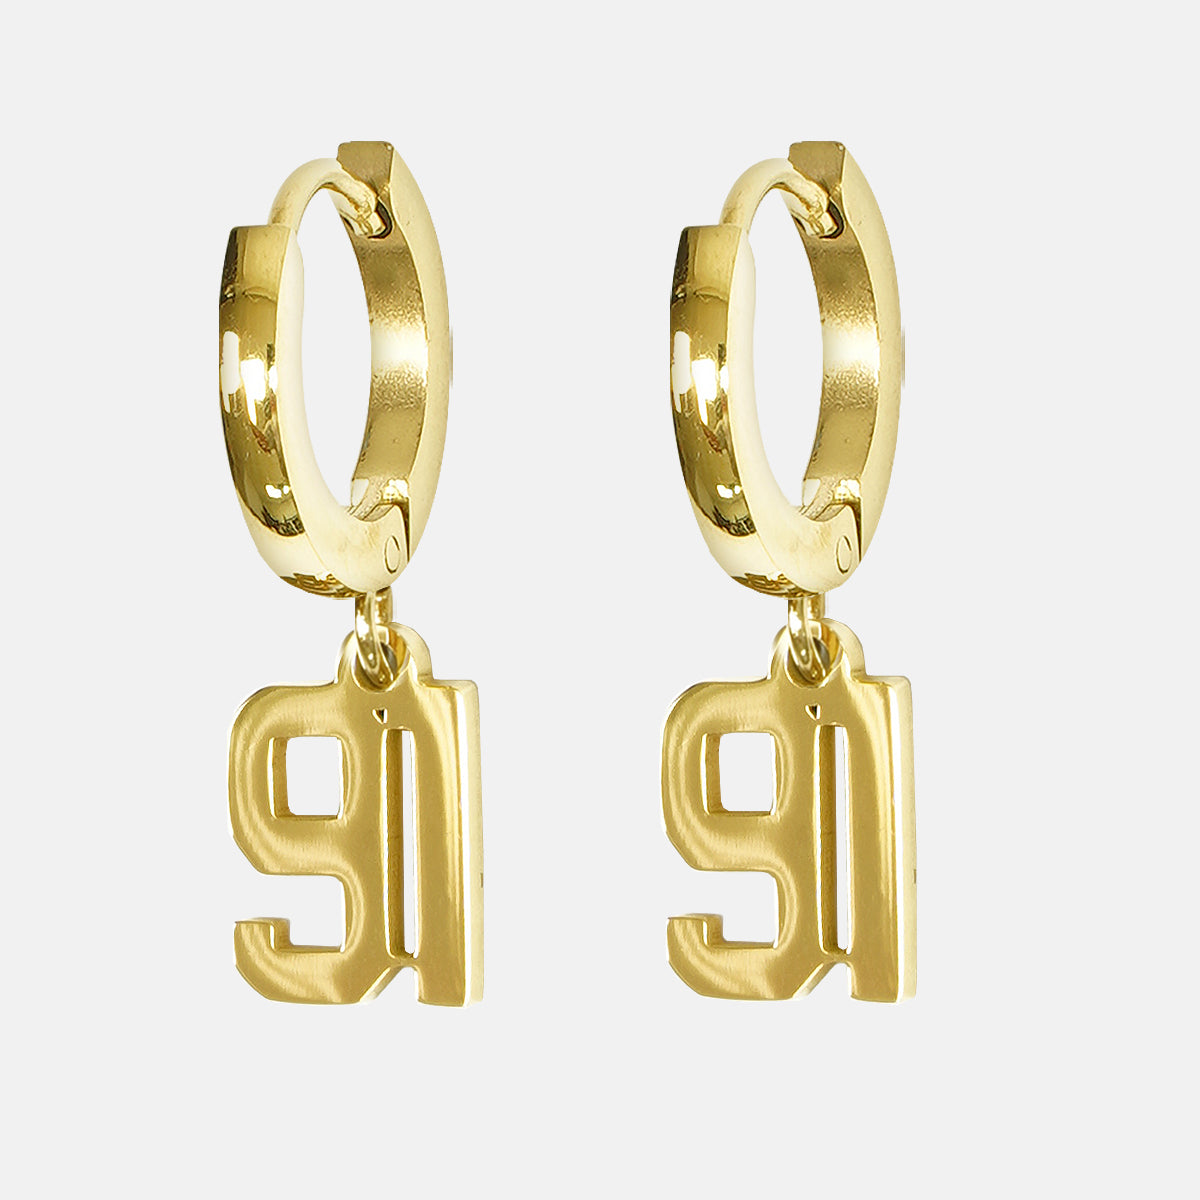 91 Number Earring - Gold Plated Stainless Steel